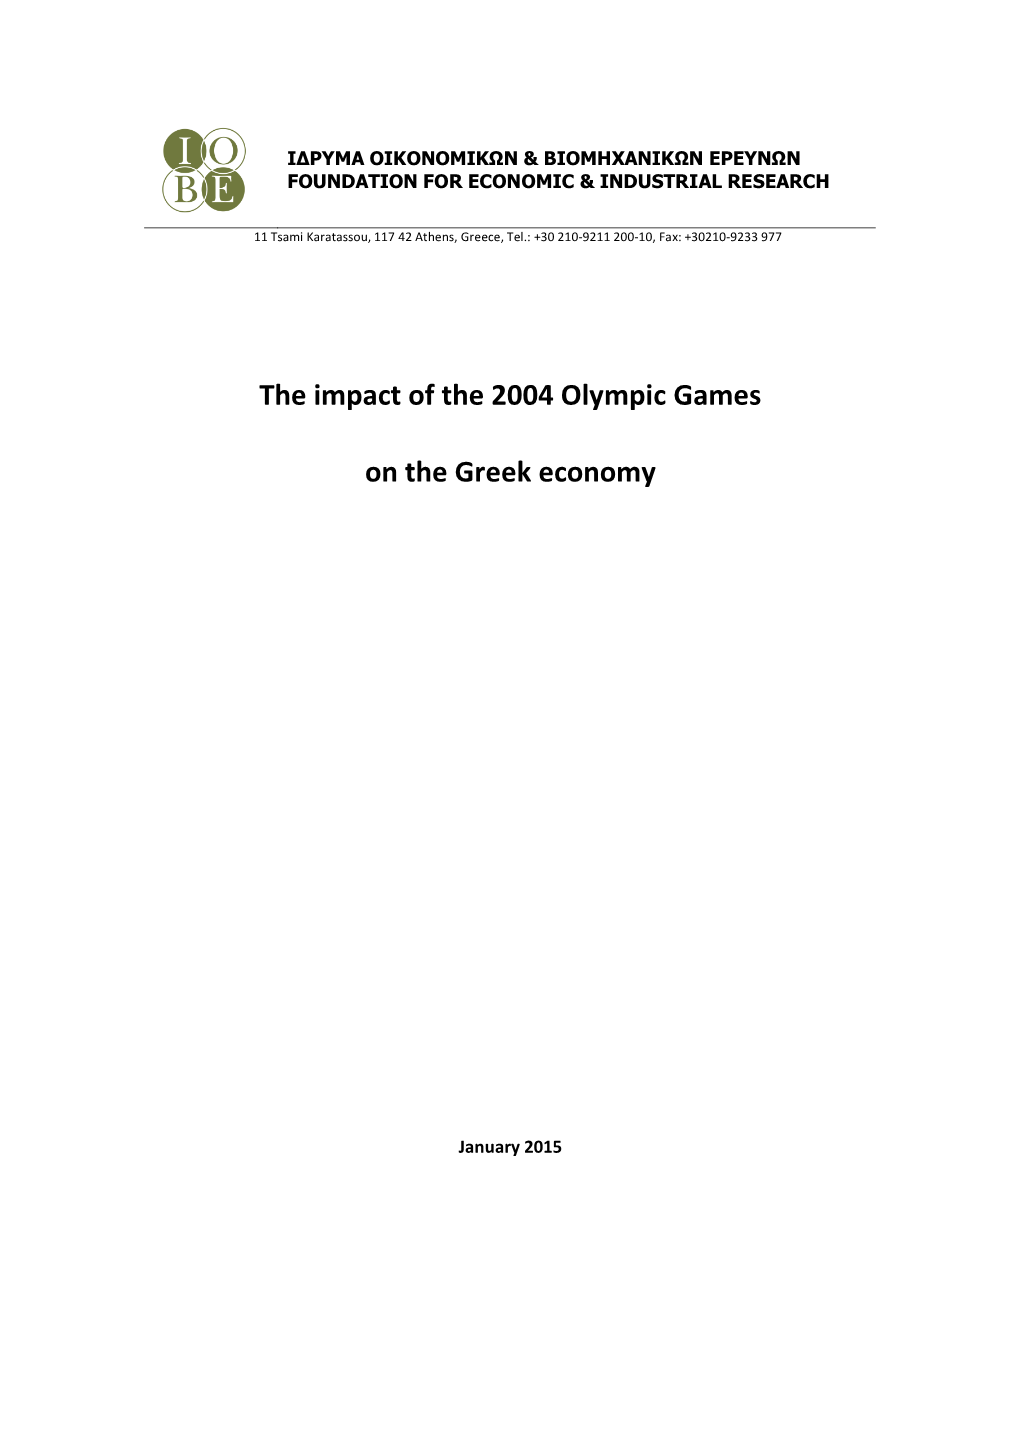 The Impact of the 2004 Olympic Games on the Greek Economy 3